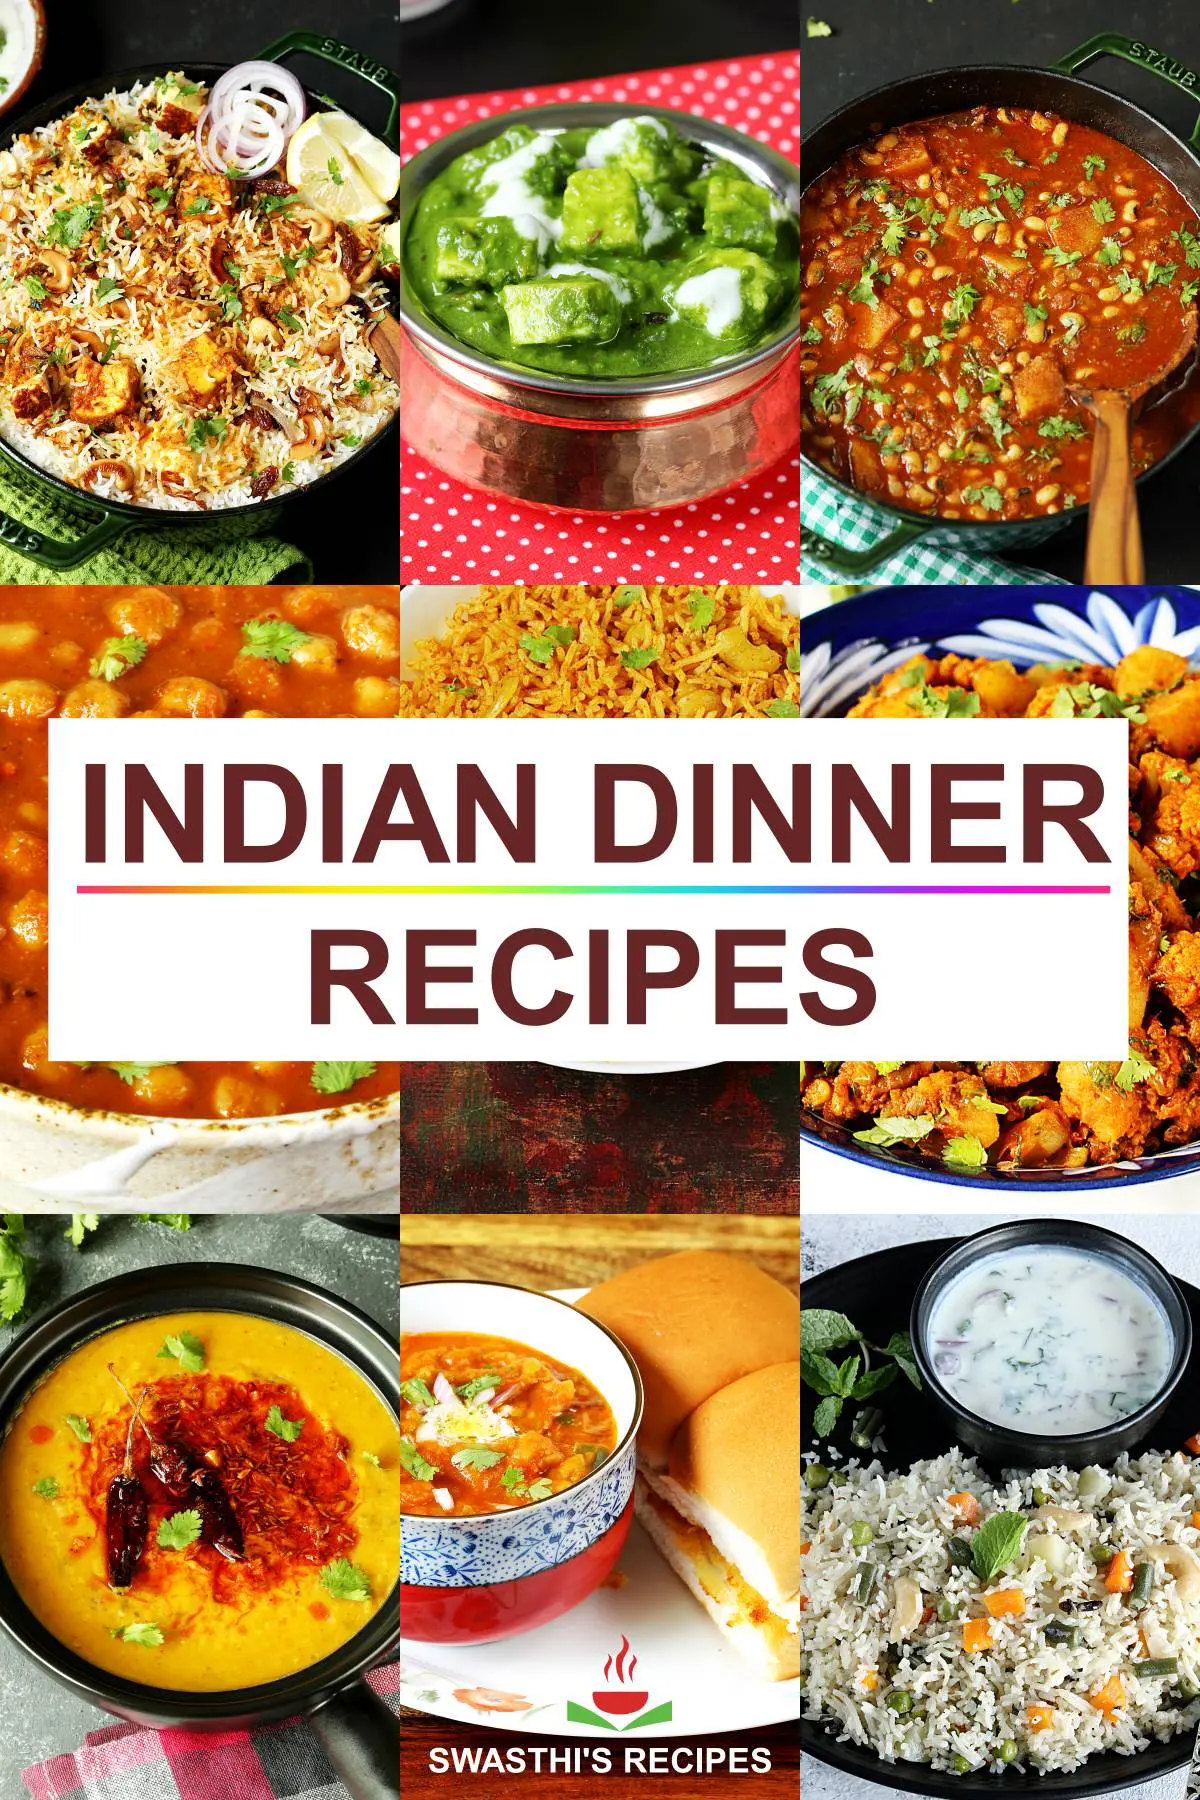 Over 100 Easy Recipes You Can Create!